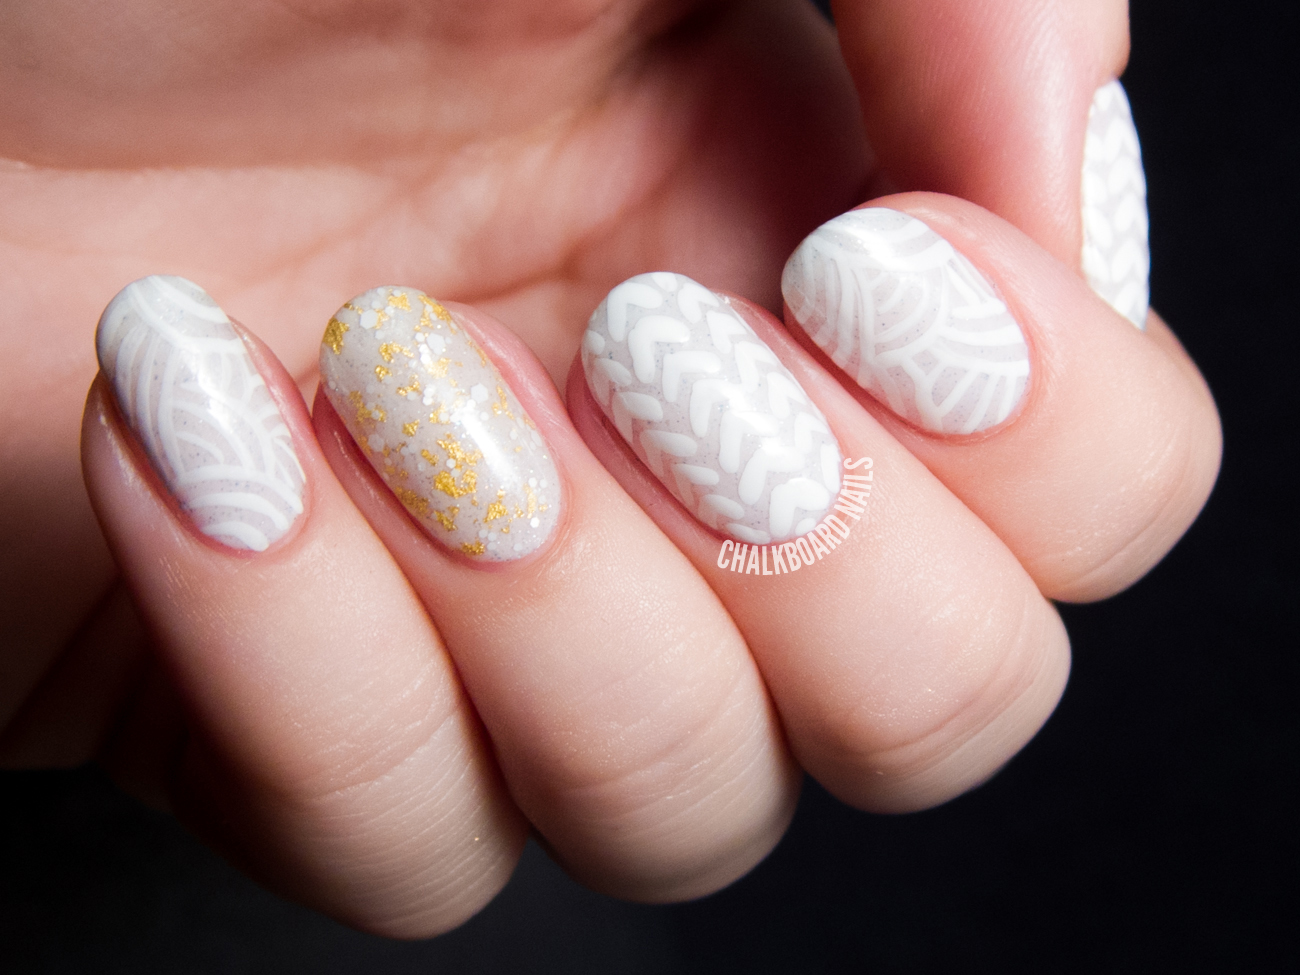 1. Sweater Nail Art Designs - wide 4